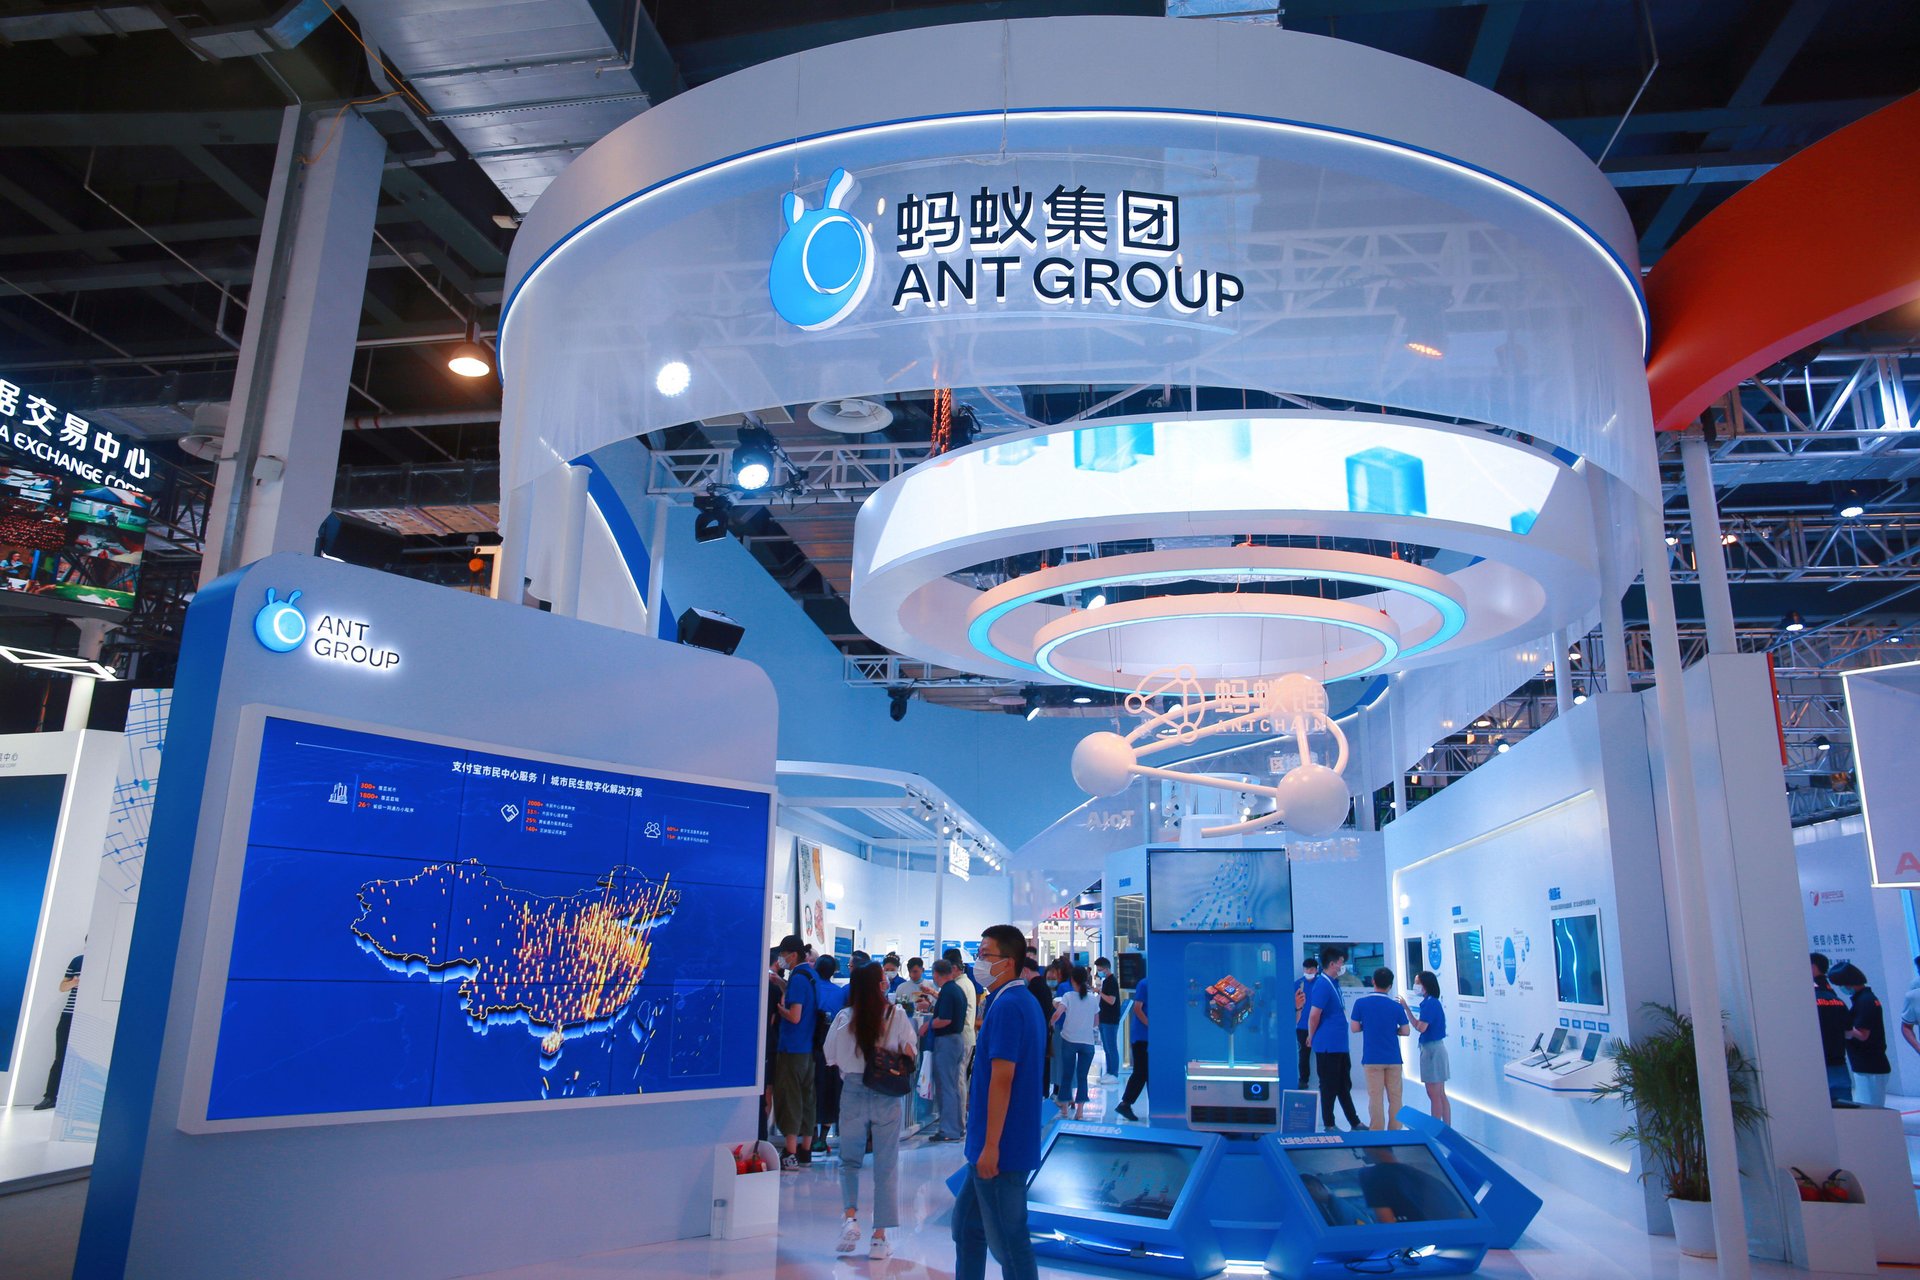 Ant Group booth with multiple displays inside a conference hall.